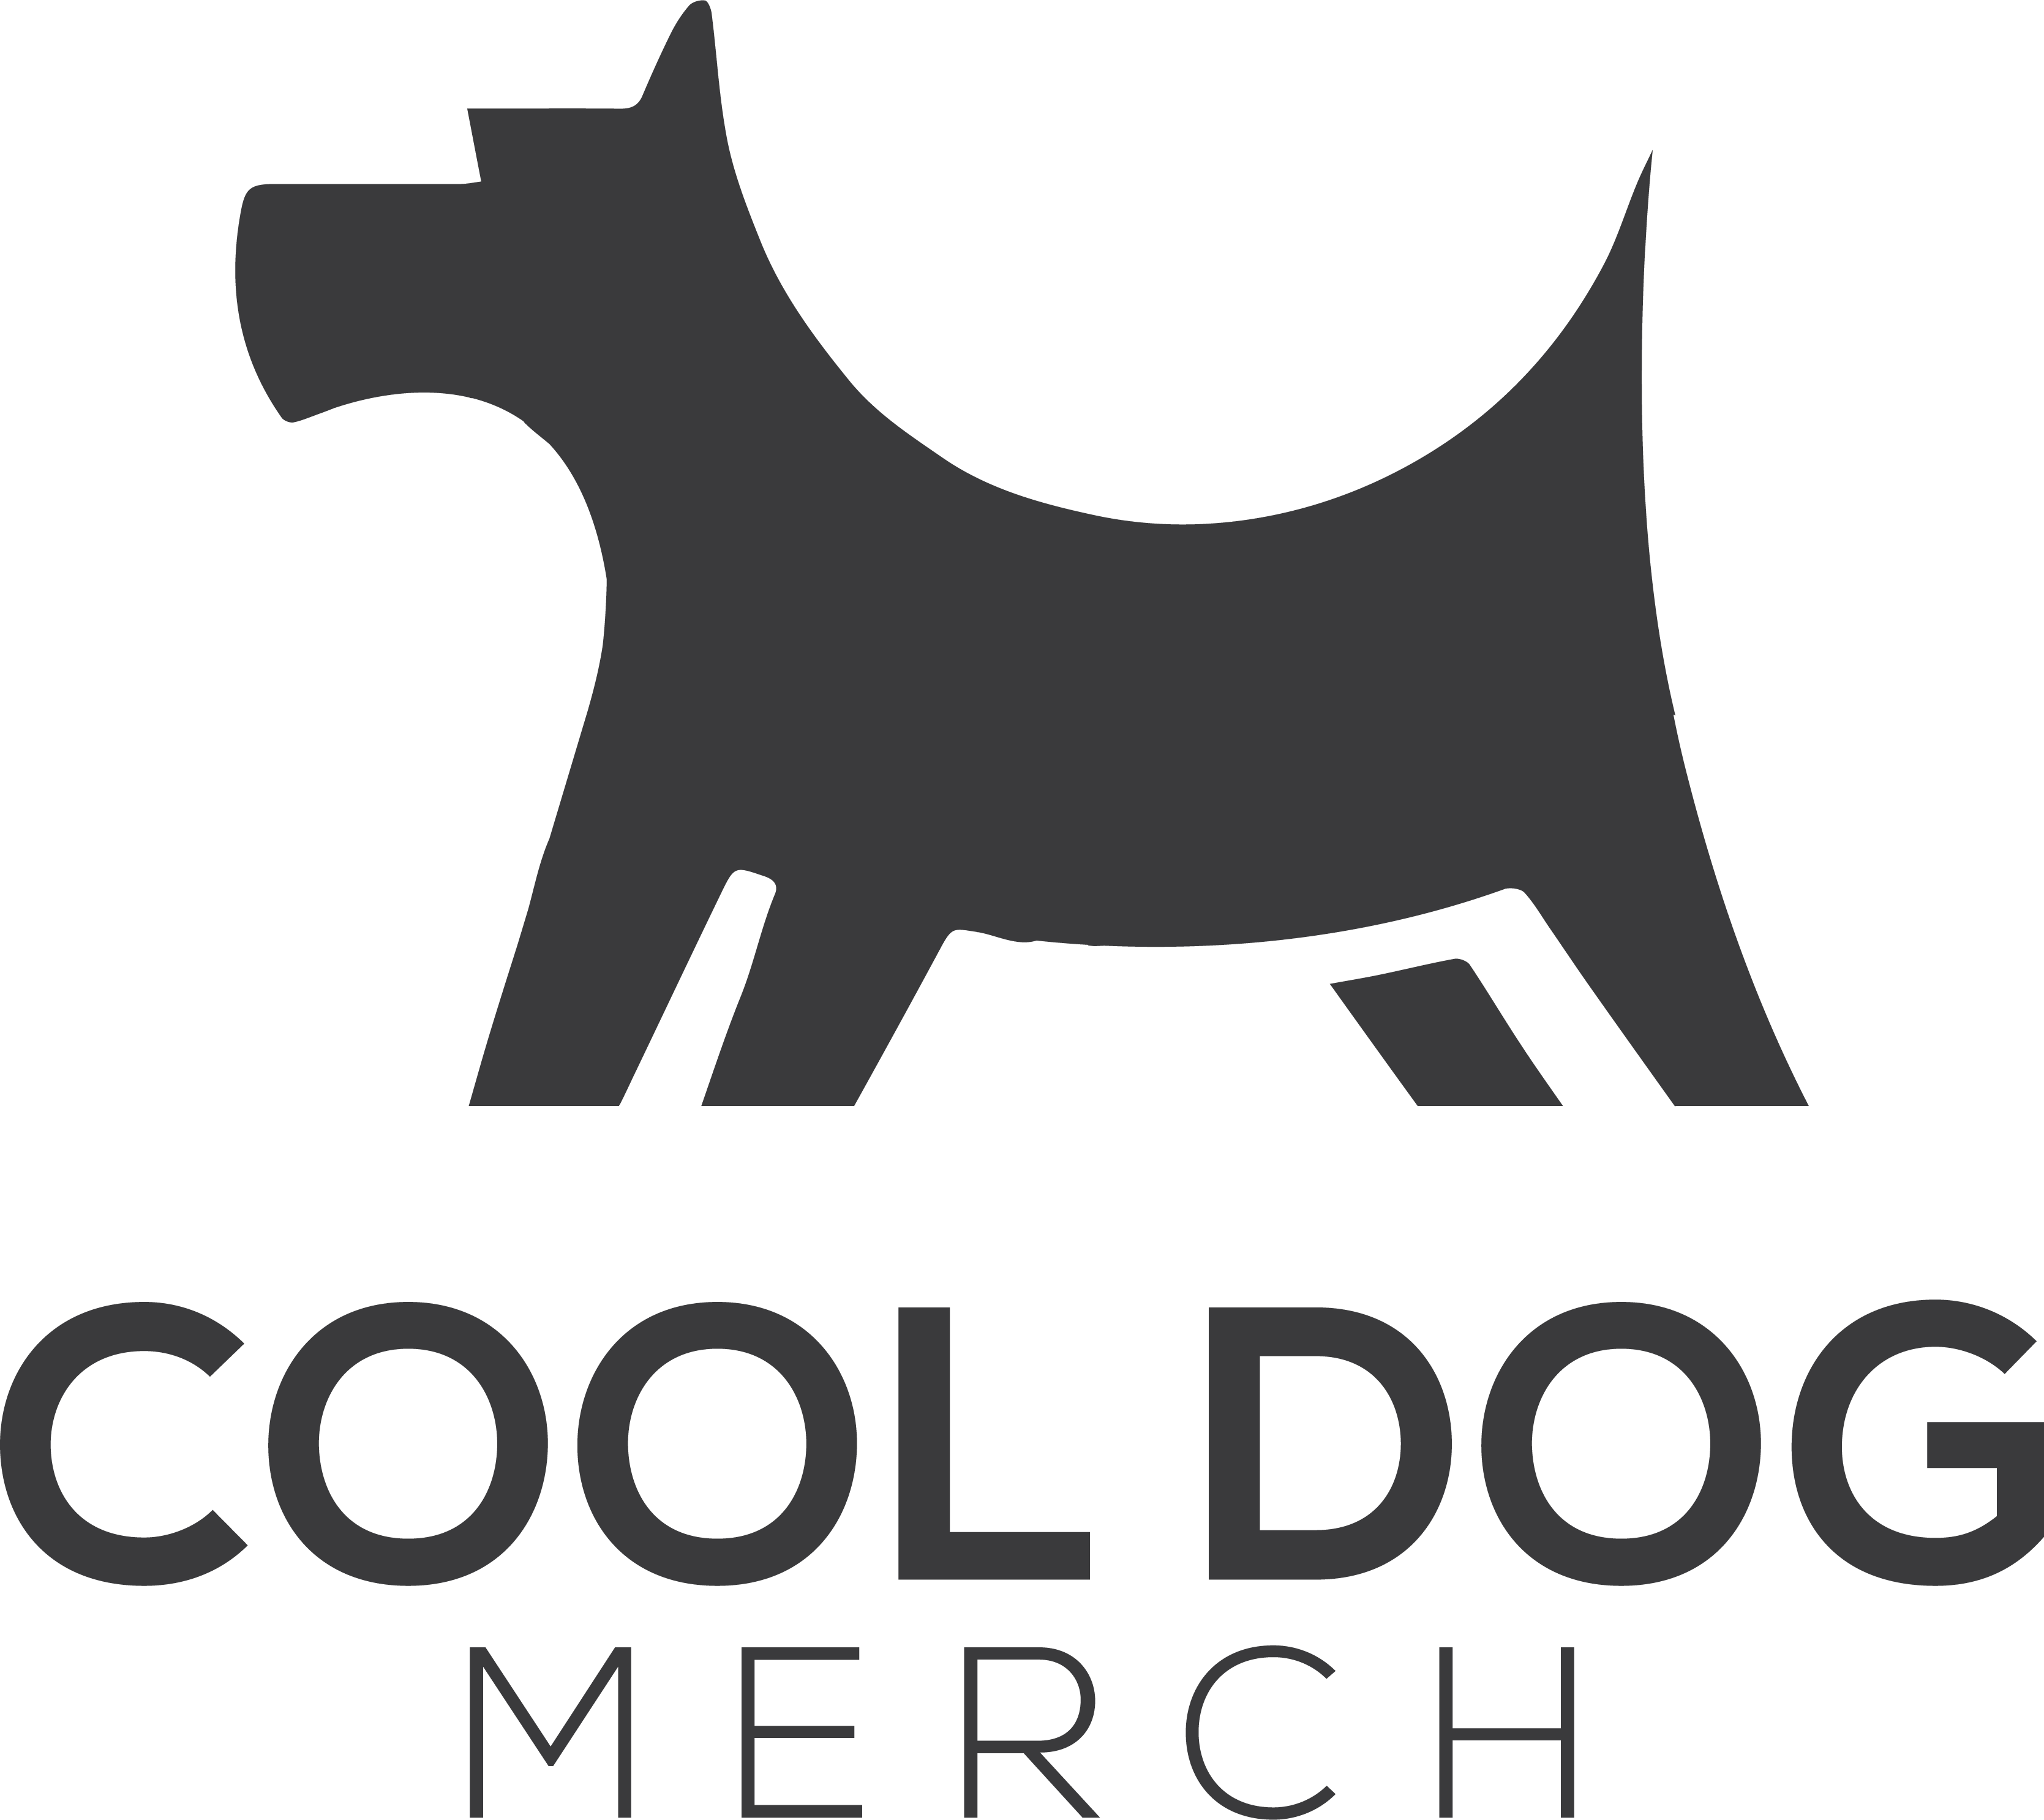 Cool Dogs Logo - Cool Dog Merch – Products for dogs and dog lovers